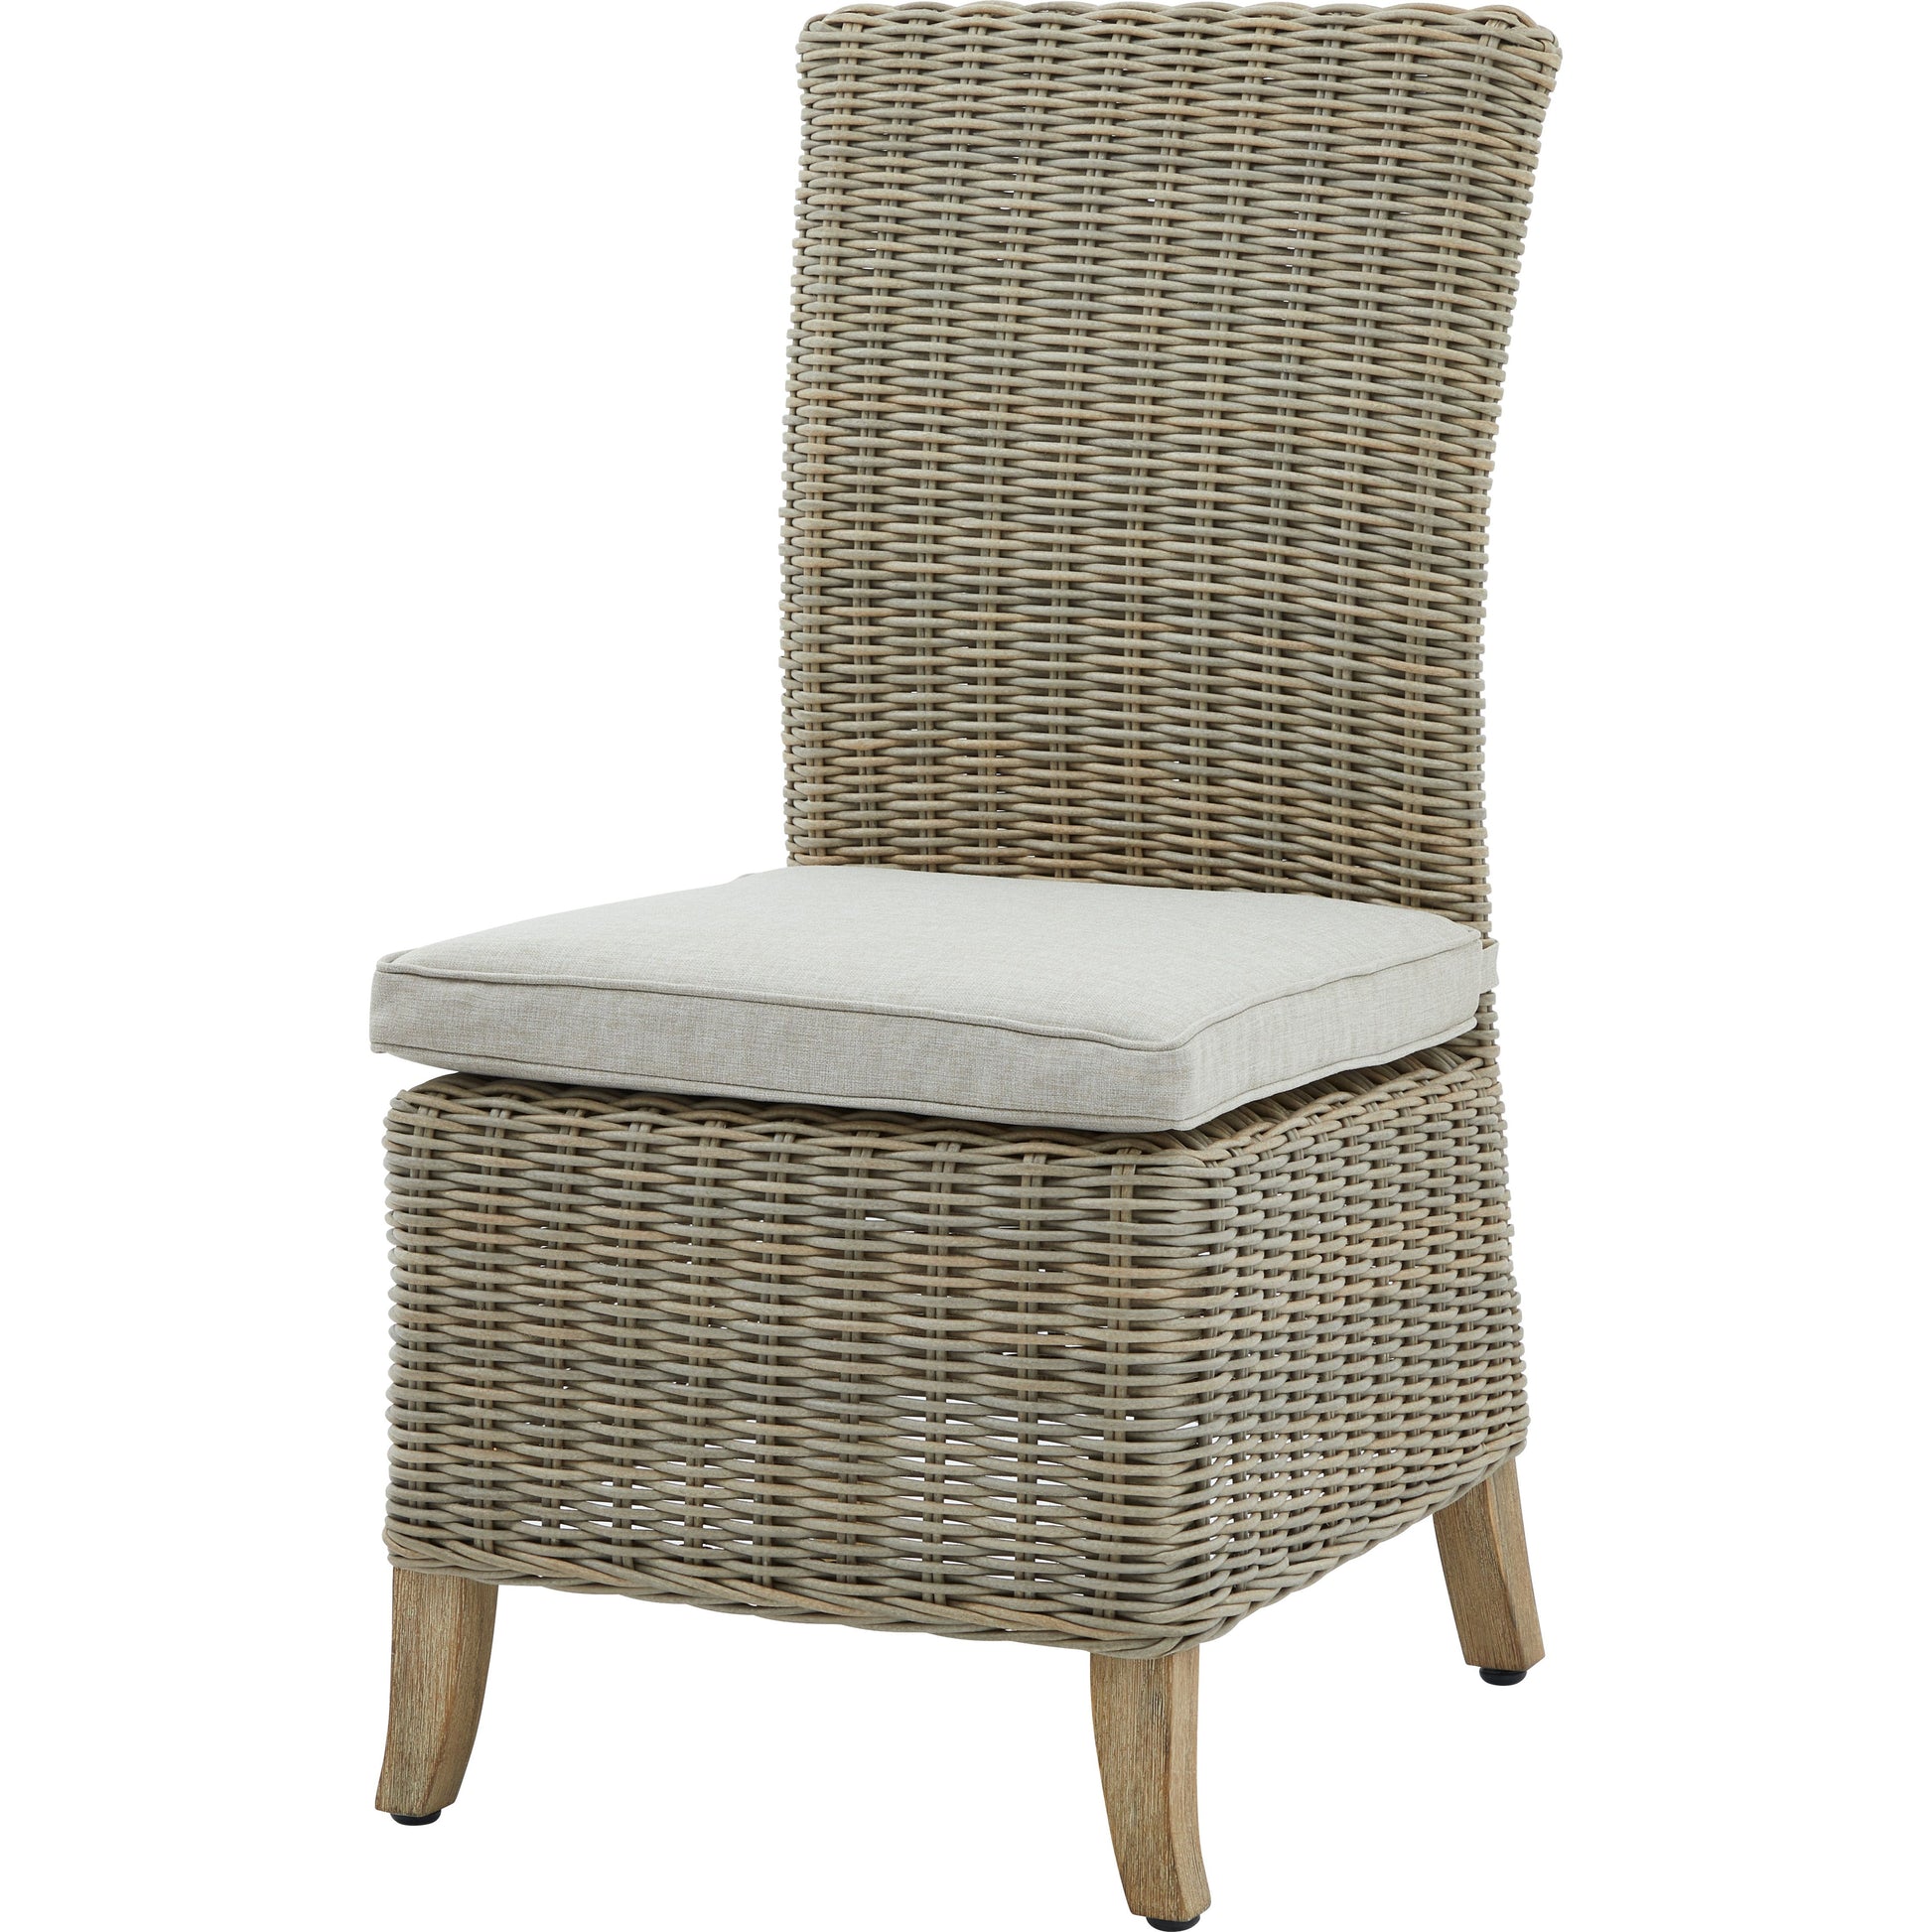 Capri Collection Outdoor Dining Chair - Ashton and Finch